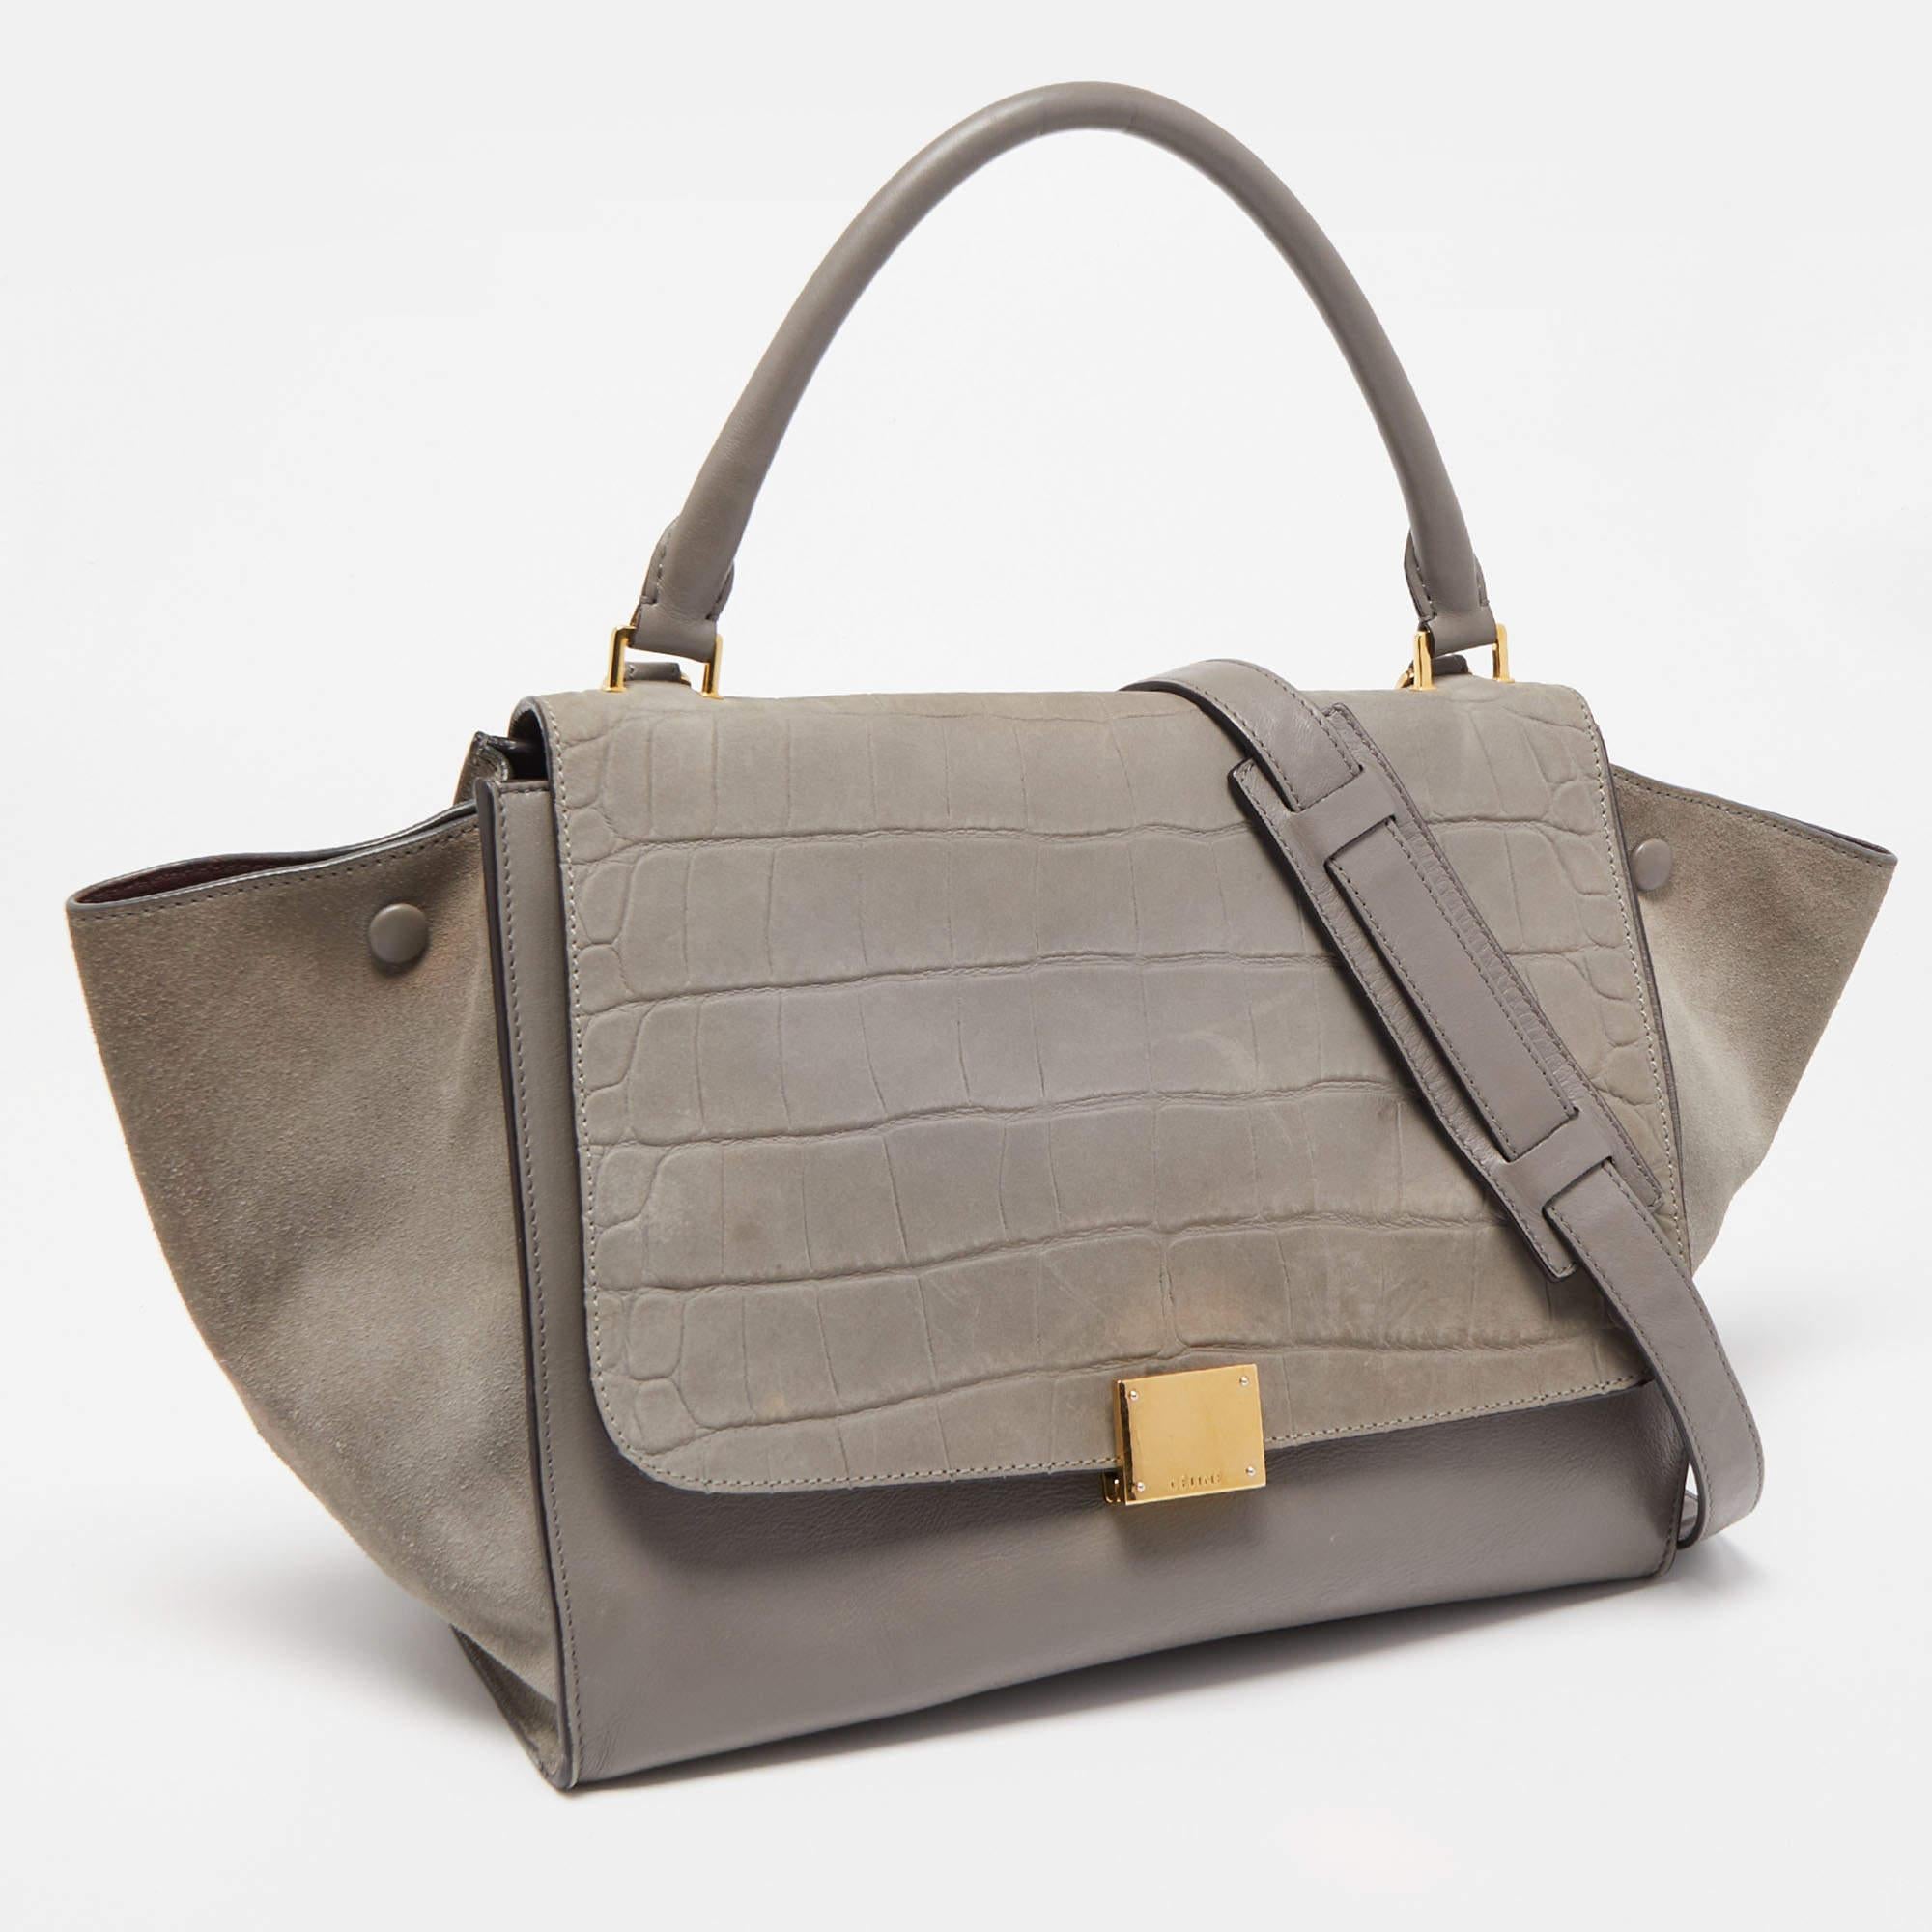 The simple silhouette and the use of durable materials for the exterior bring out the appeal of this Celine bag for women. It features a comfortable handle and a well-lined interior.

